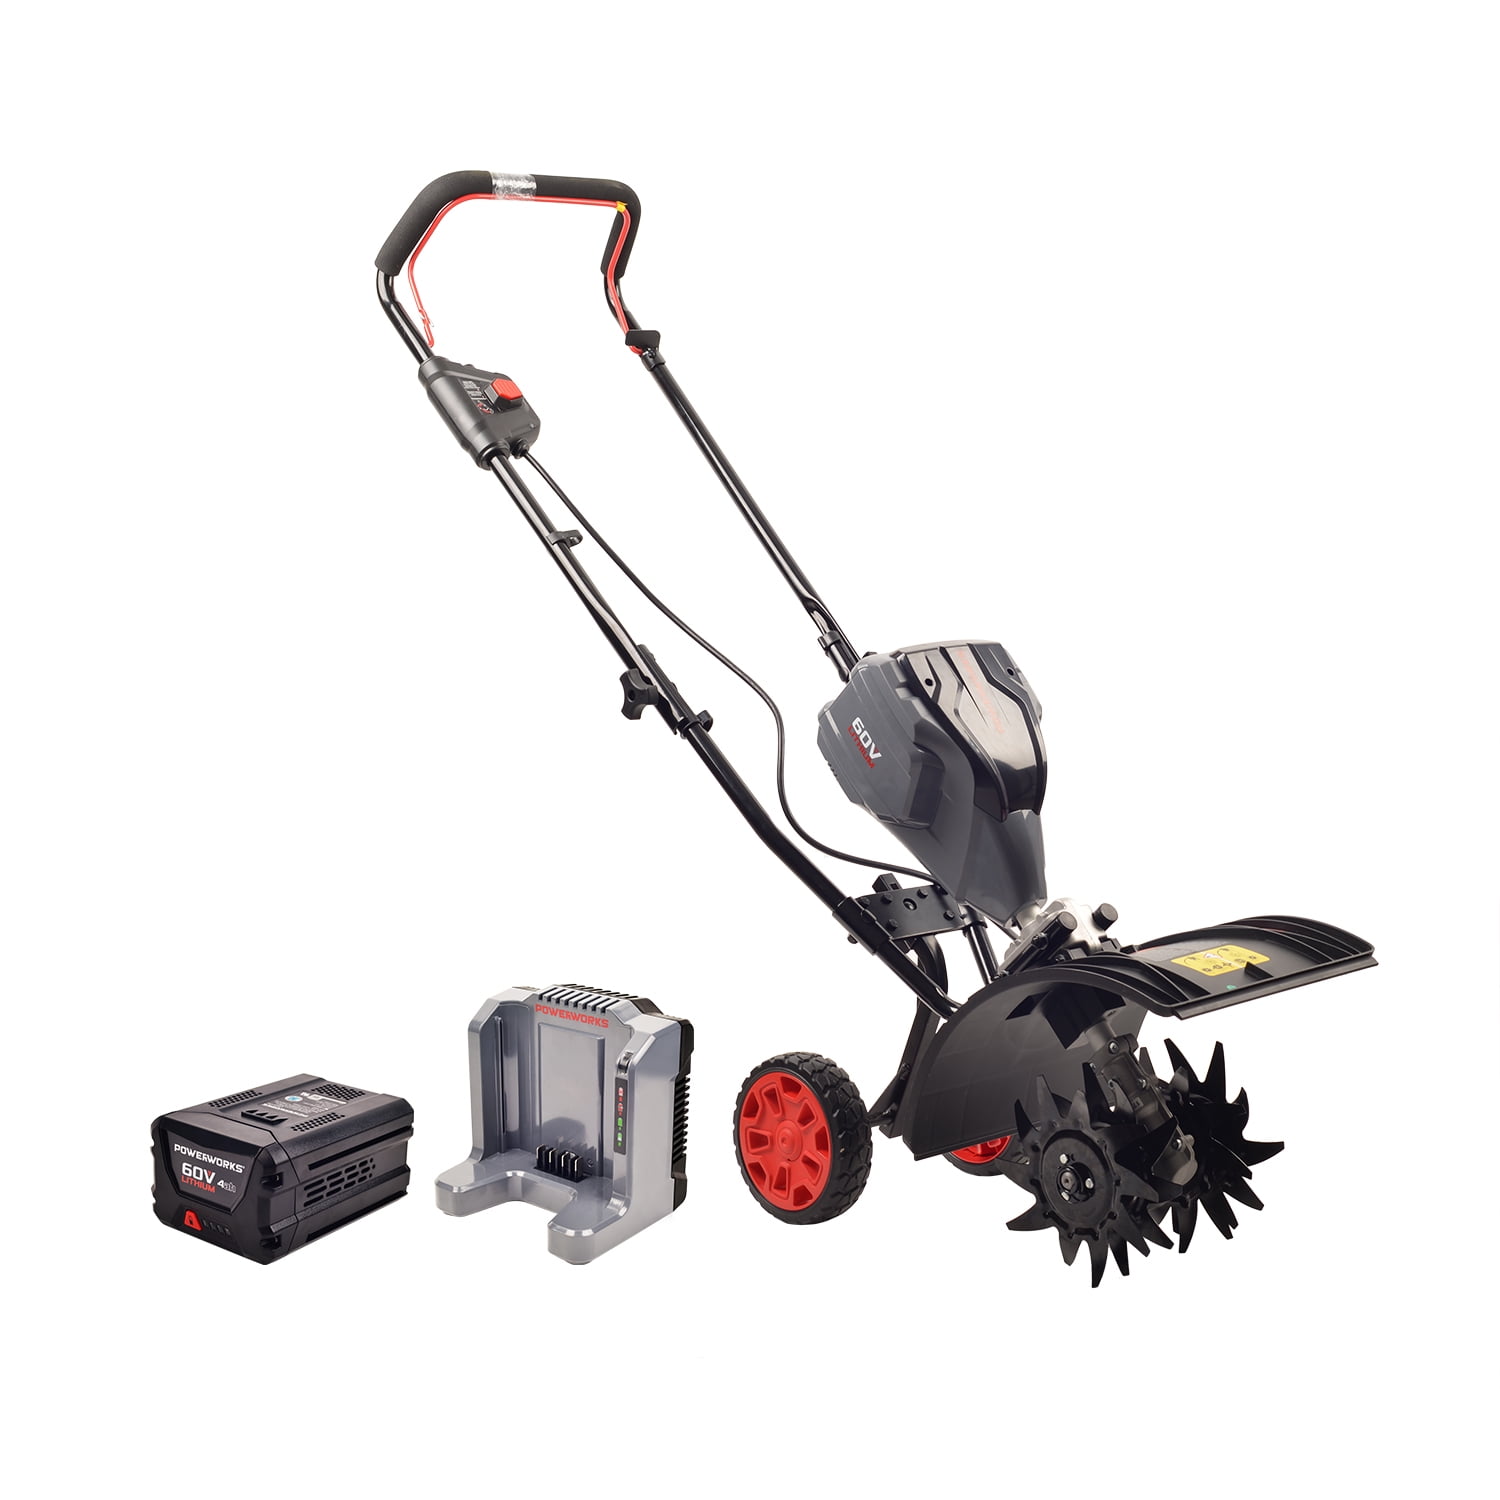 POWERWORKS 60V 21 Inch Cordless Lawn Mower Brushless Motor, Battery and  Charger Not Included